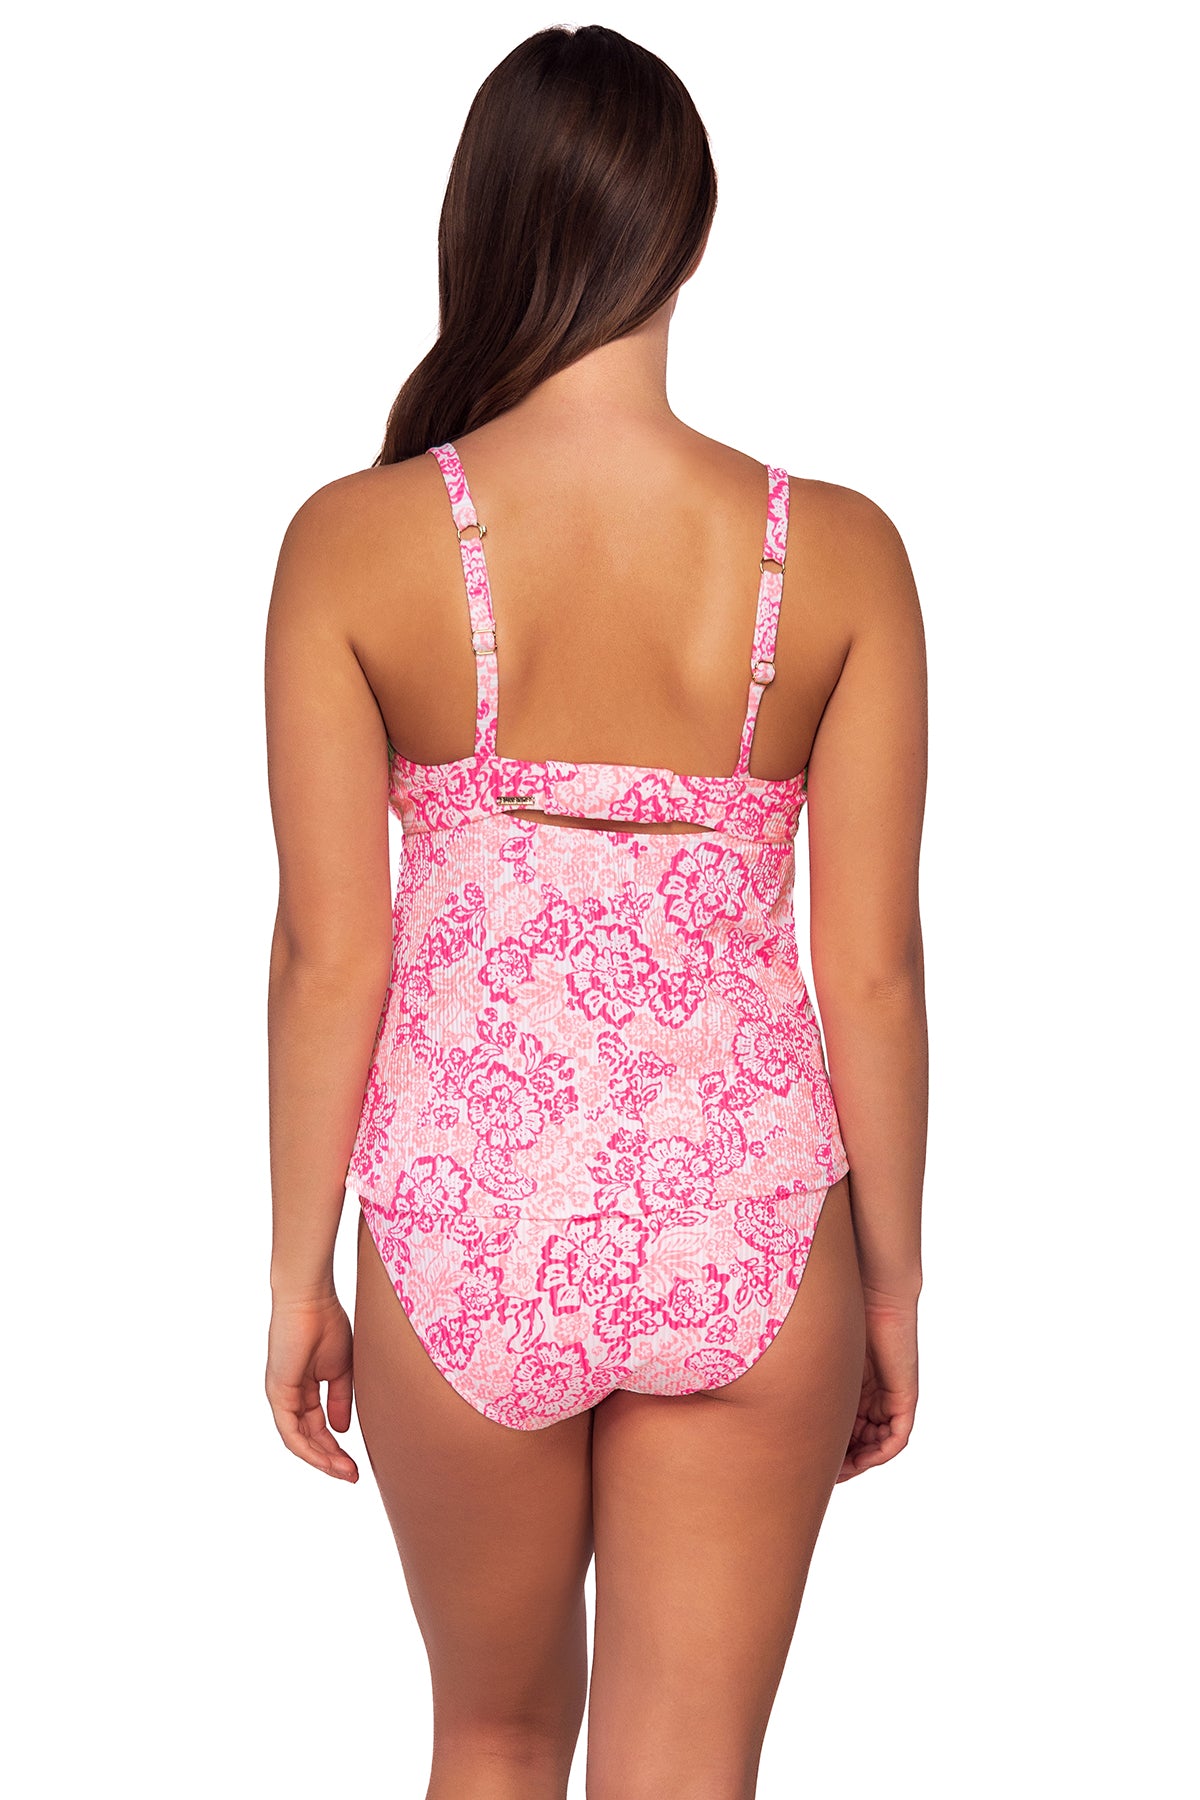 Back view of Sunsets Coral Cove Maeve Tankini Top